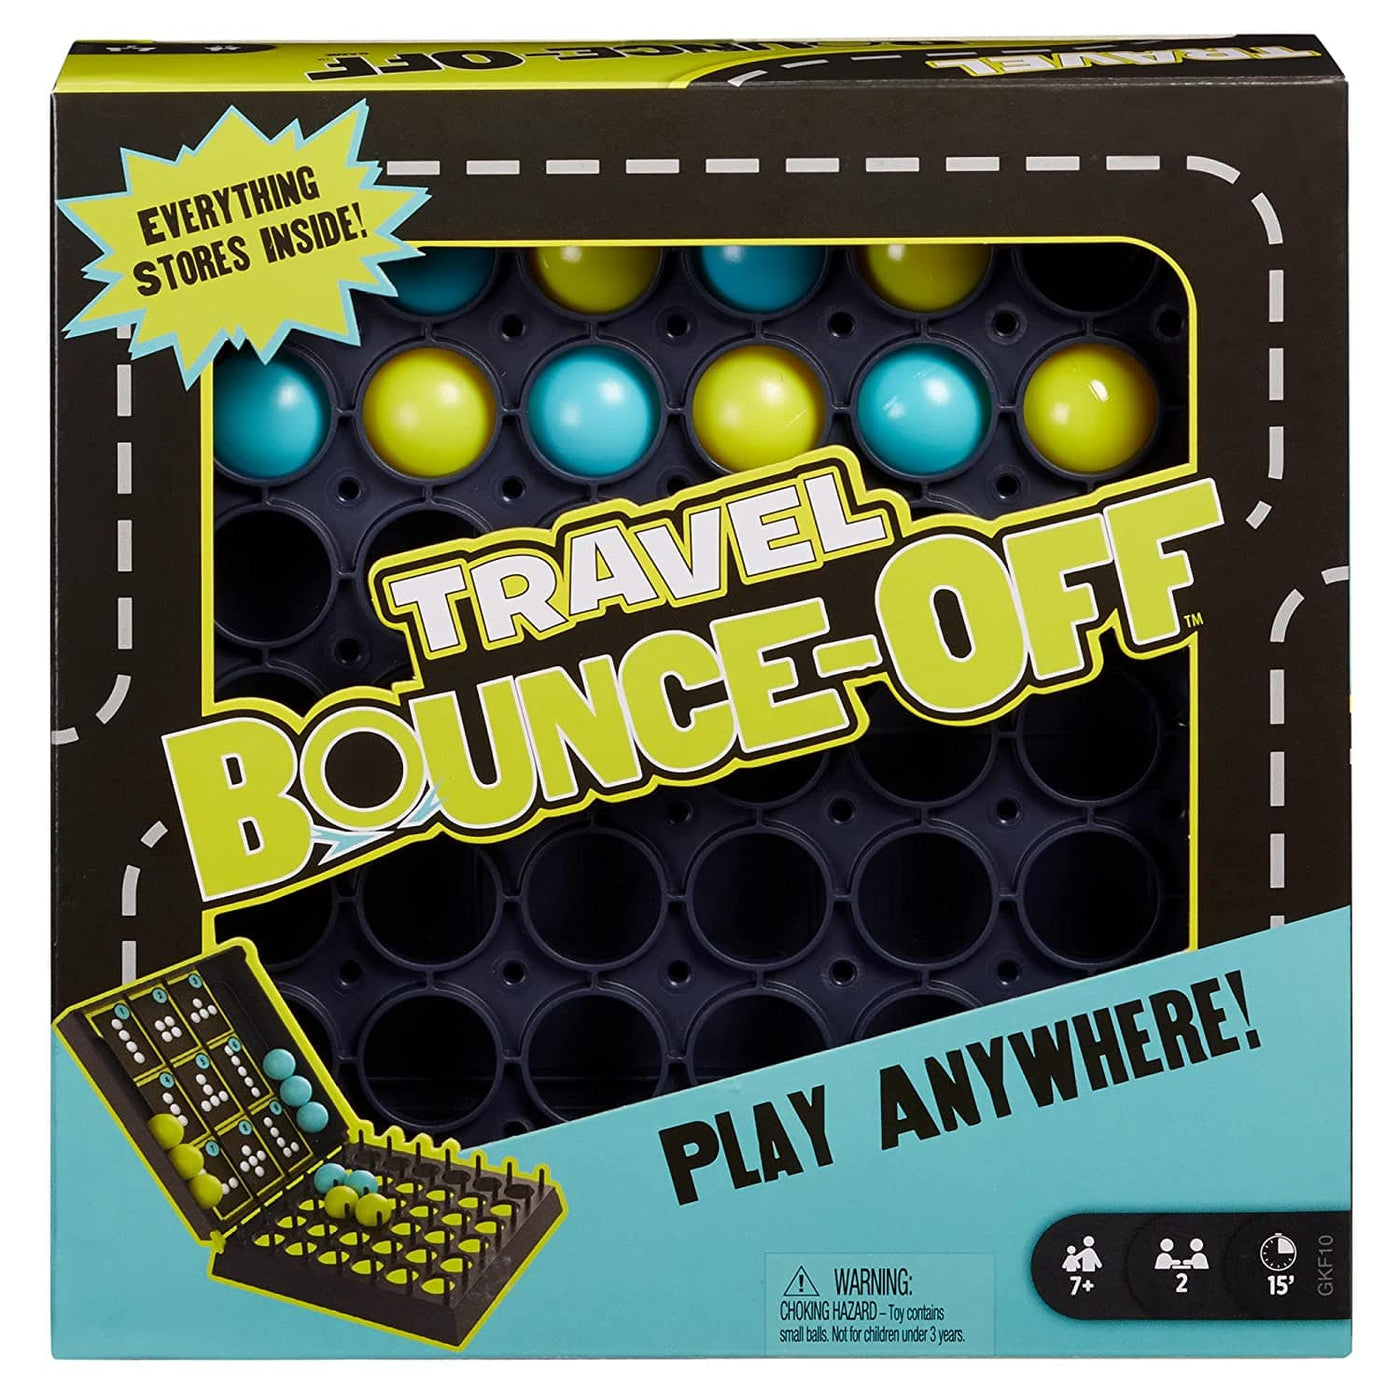 Travel Bounce-Off: Play Anywhere! | Mattel Games by Mattel, USA Game